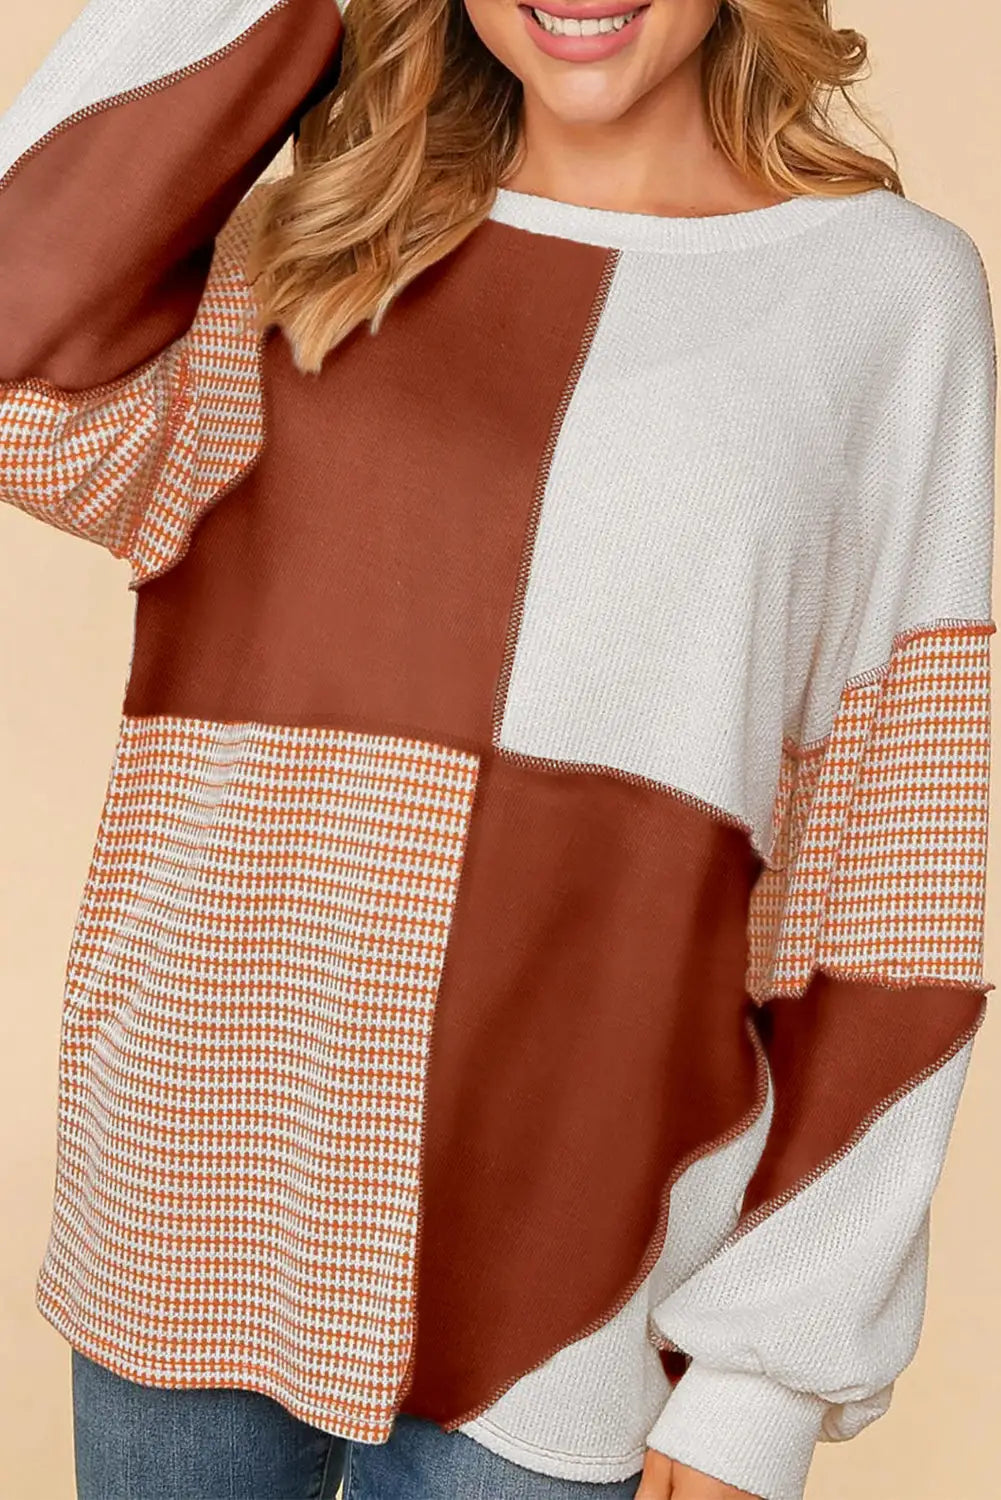 Red sandalwood exposed seam colorblock oversized knit top - l / 85% polyester + 15% elastane - long sleeve tops